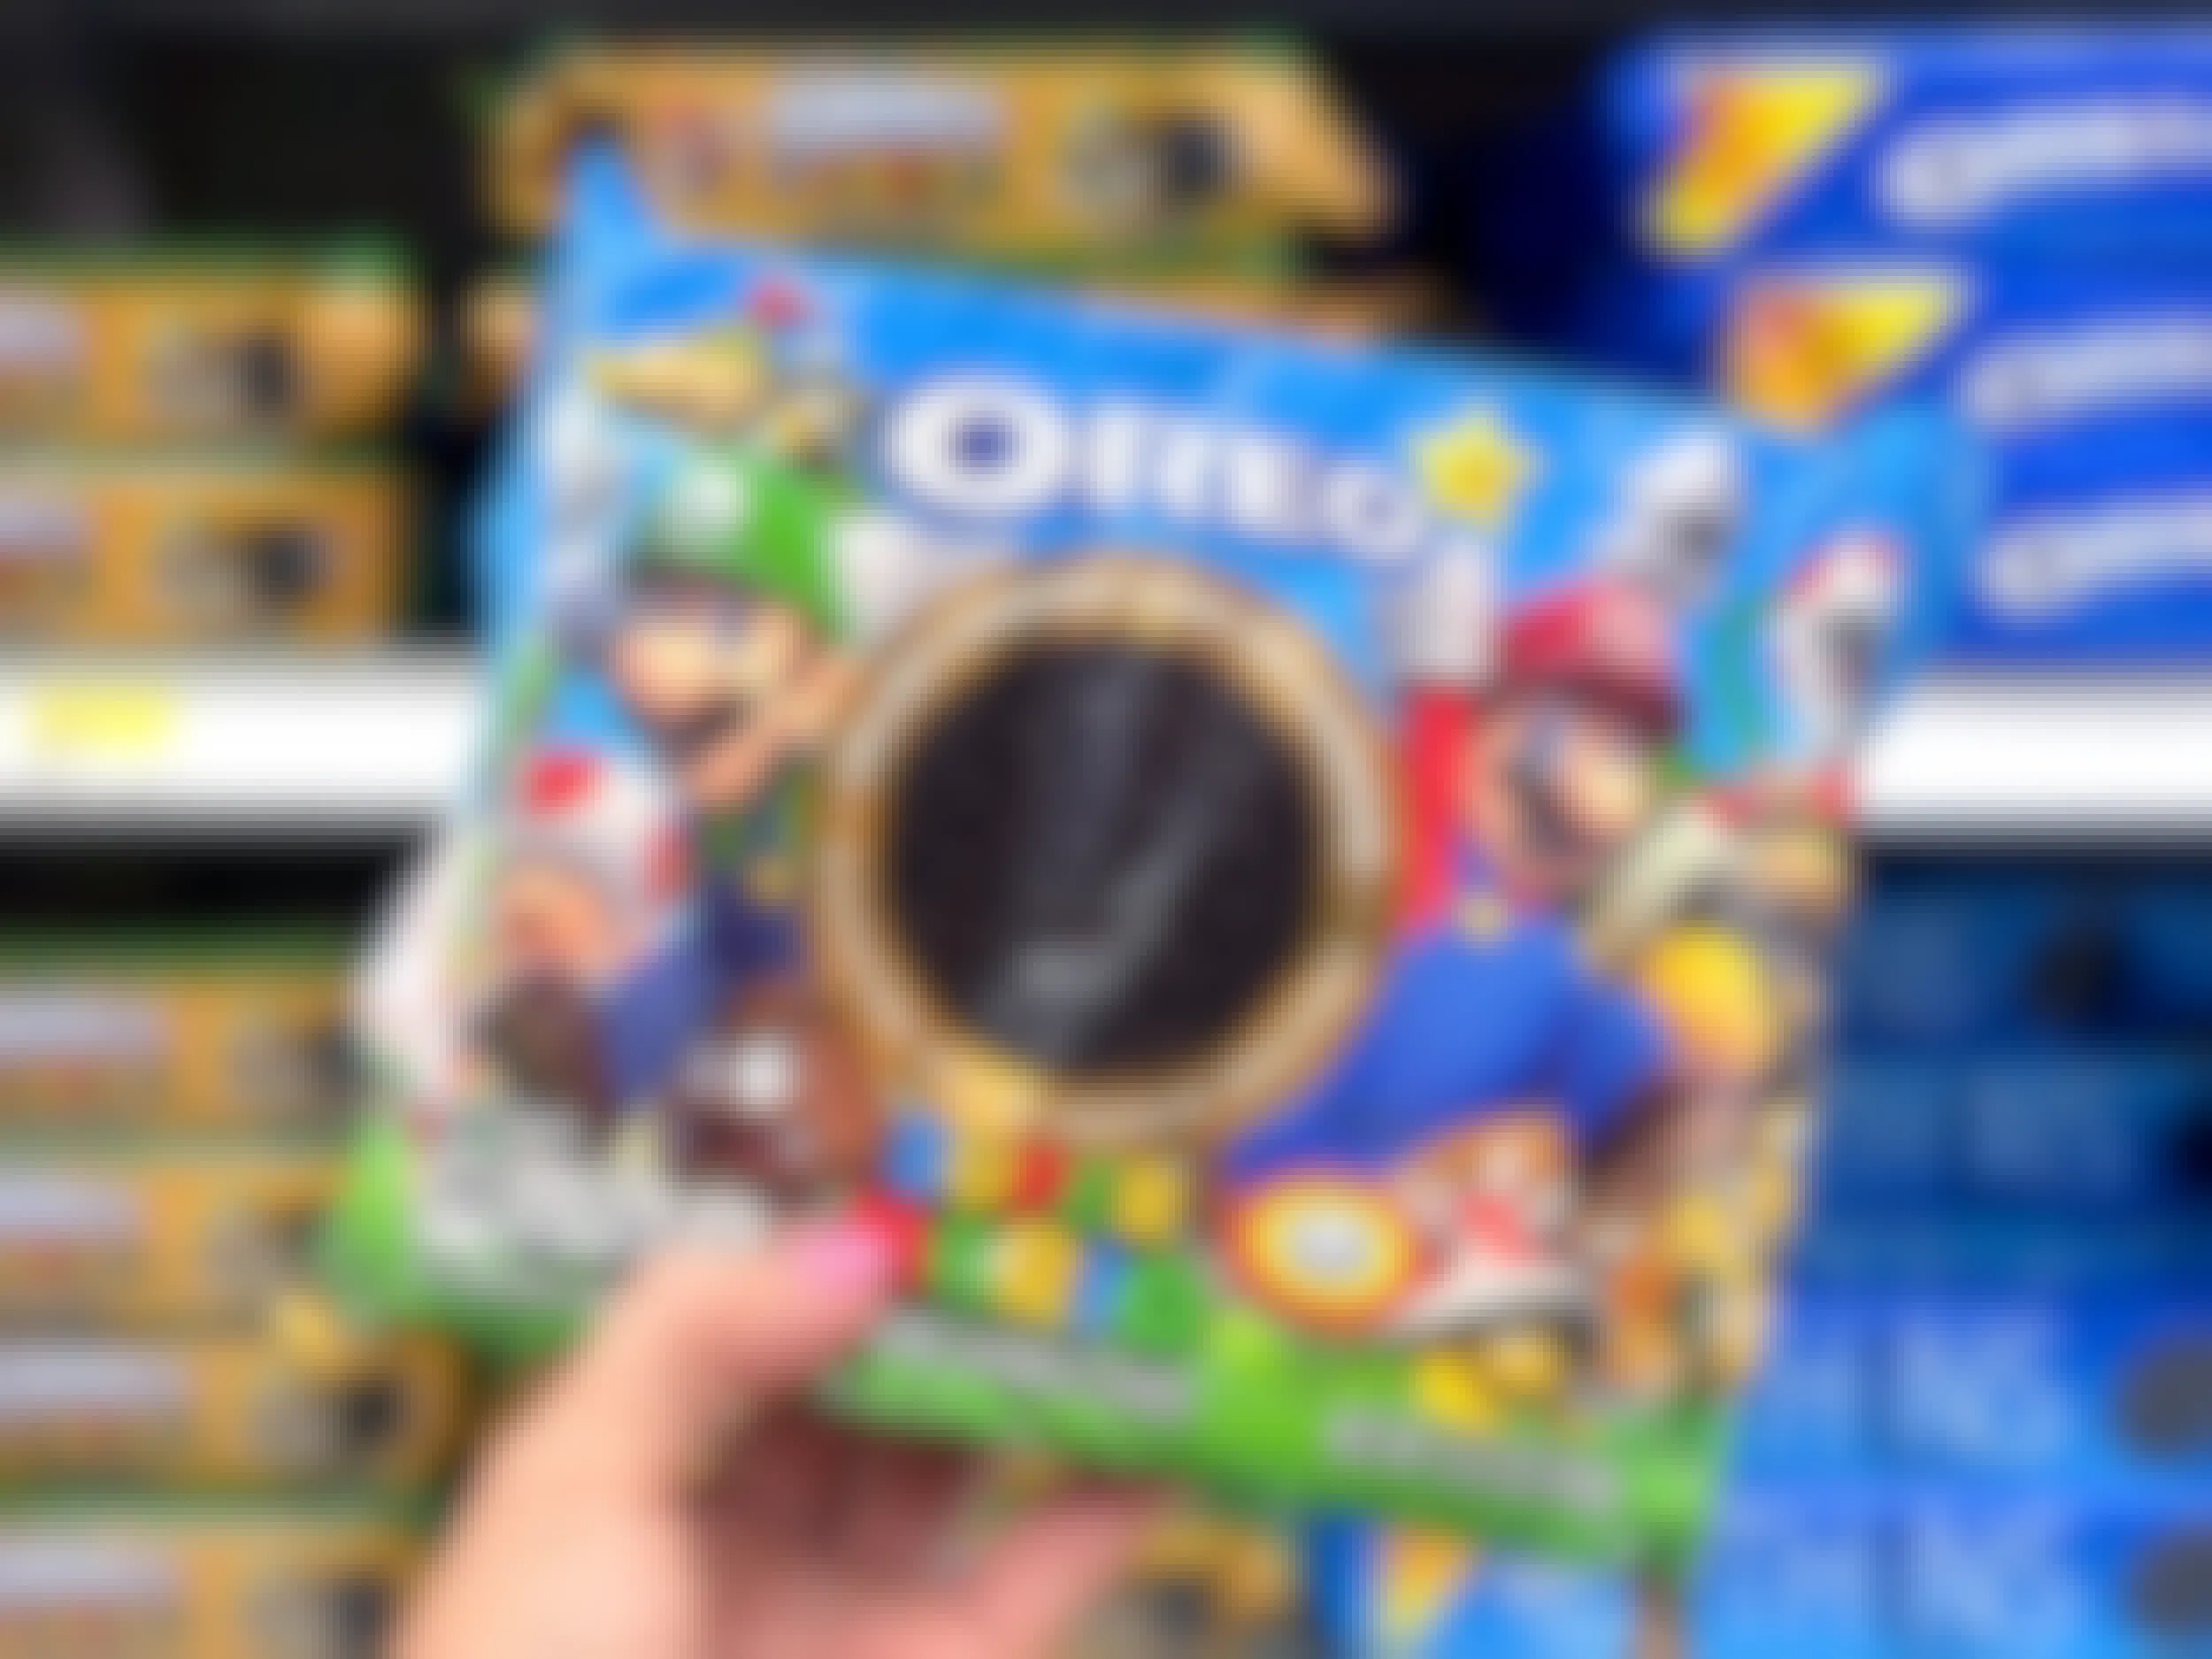 person's hand holding a package of super mario brothers oreo cookies in target store